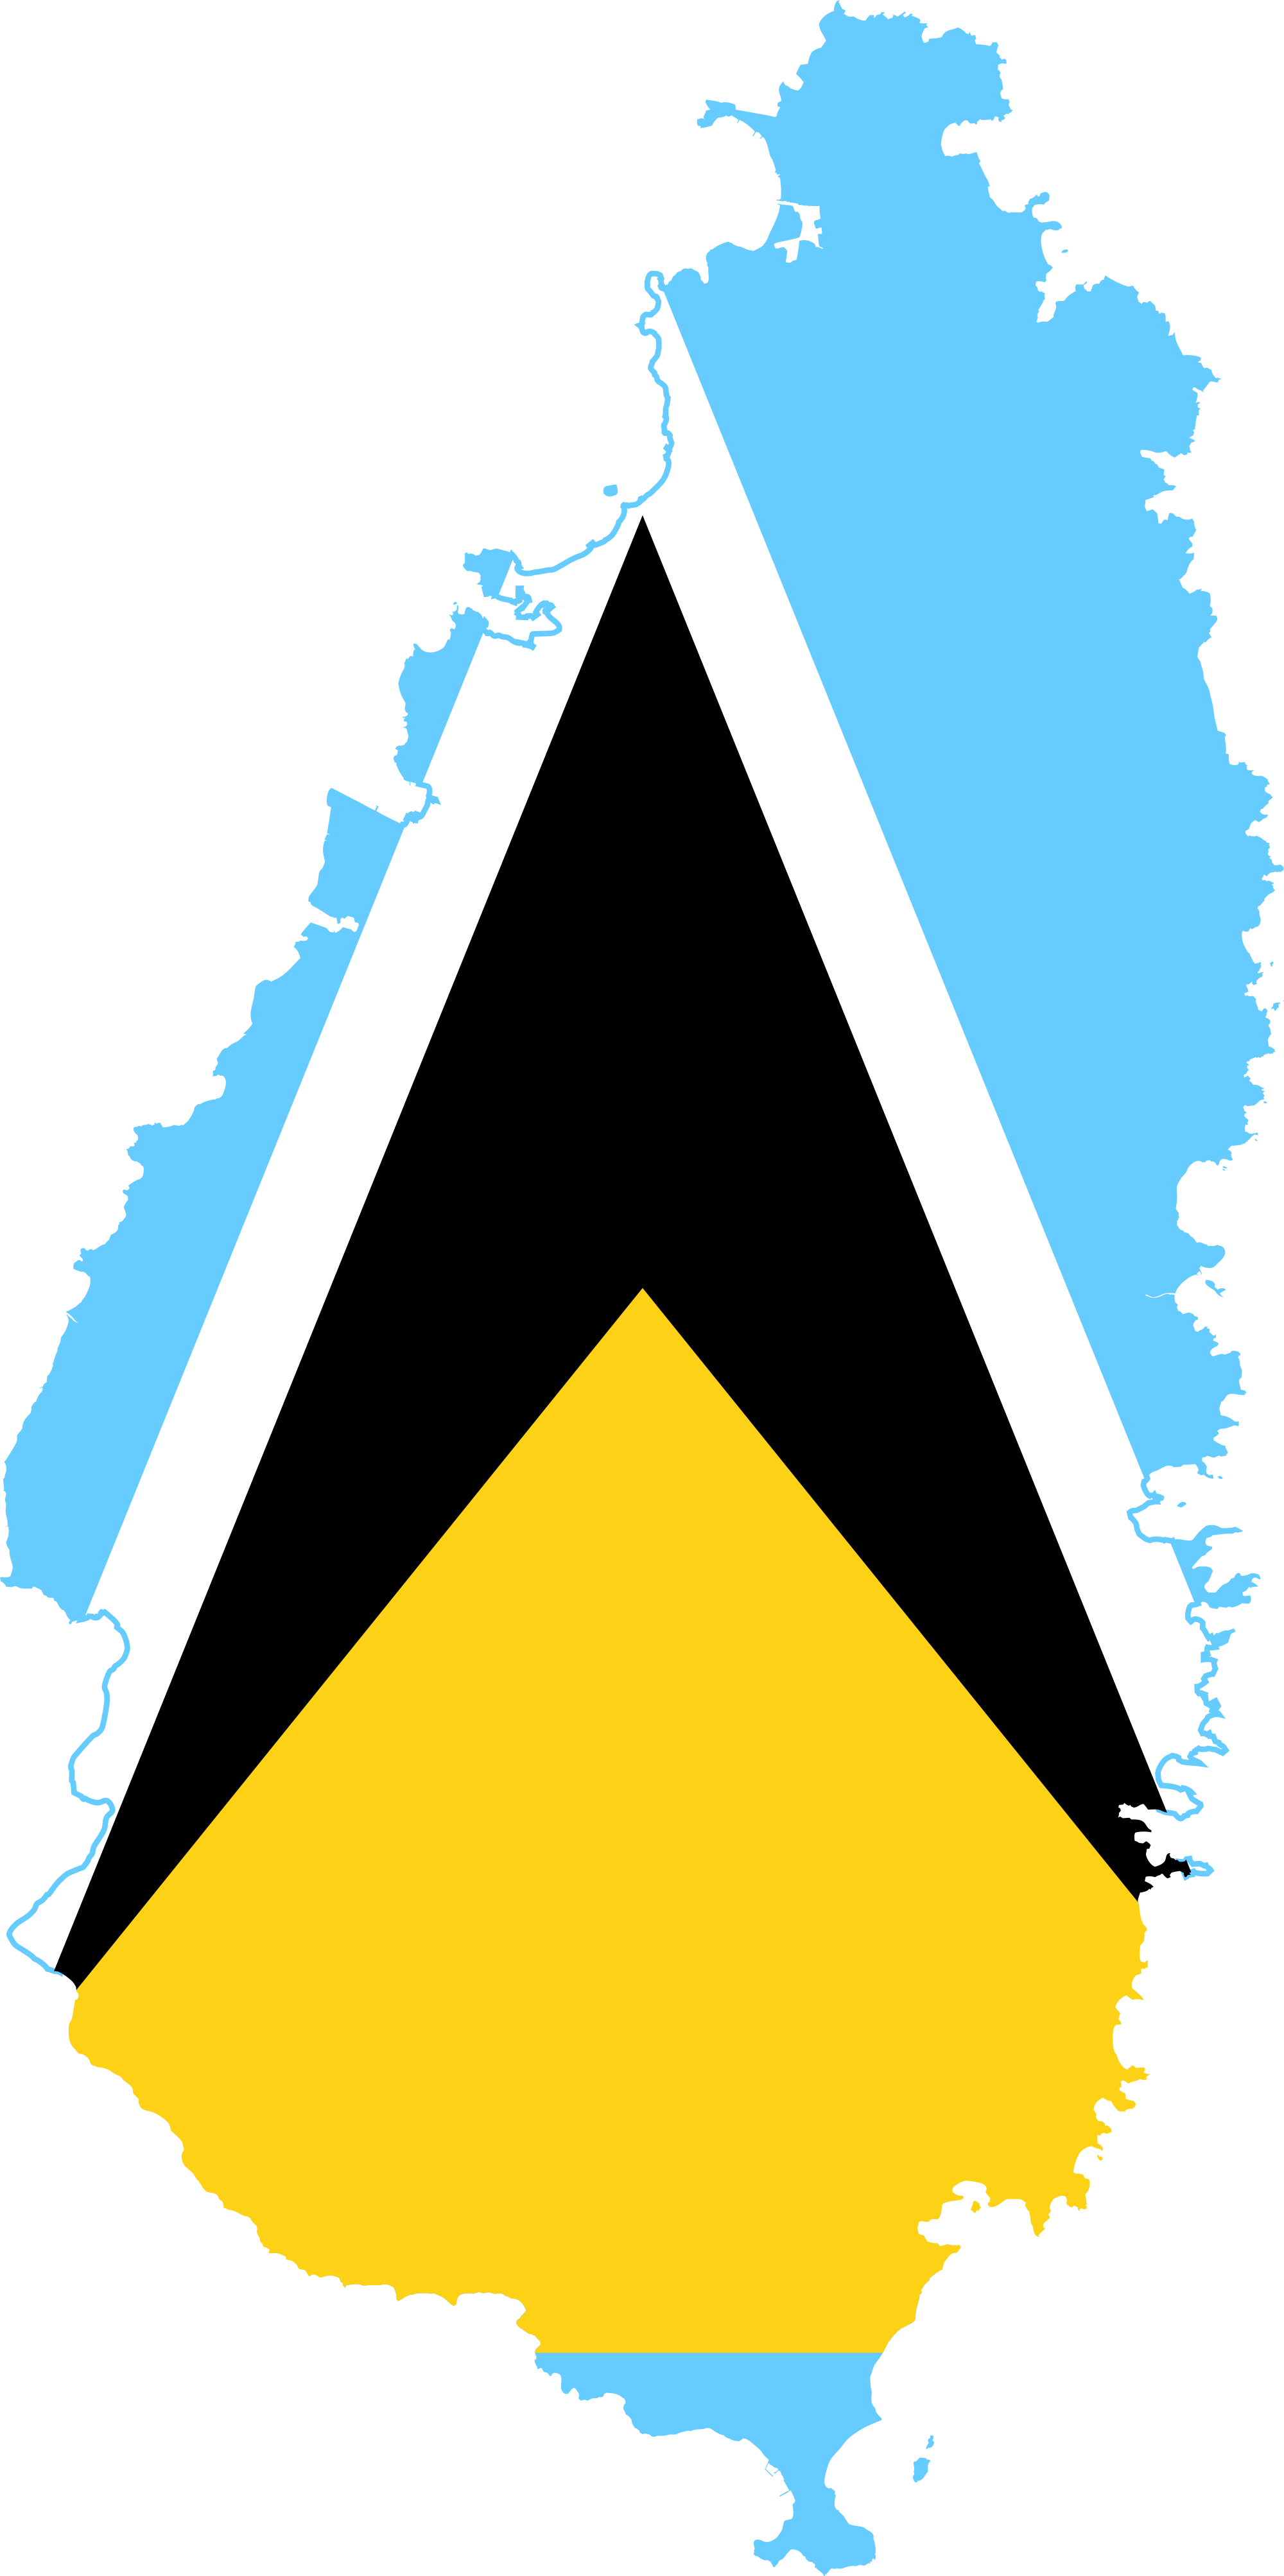 Open - St Lucia Flag Map (2000x4013)